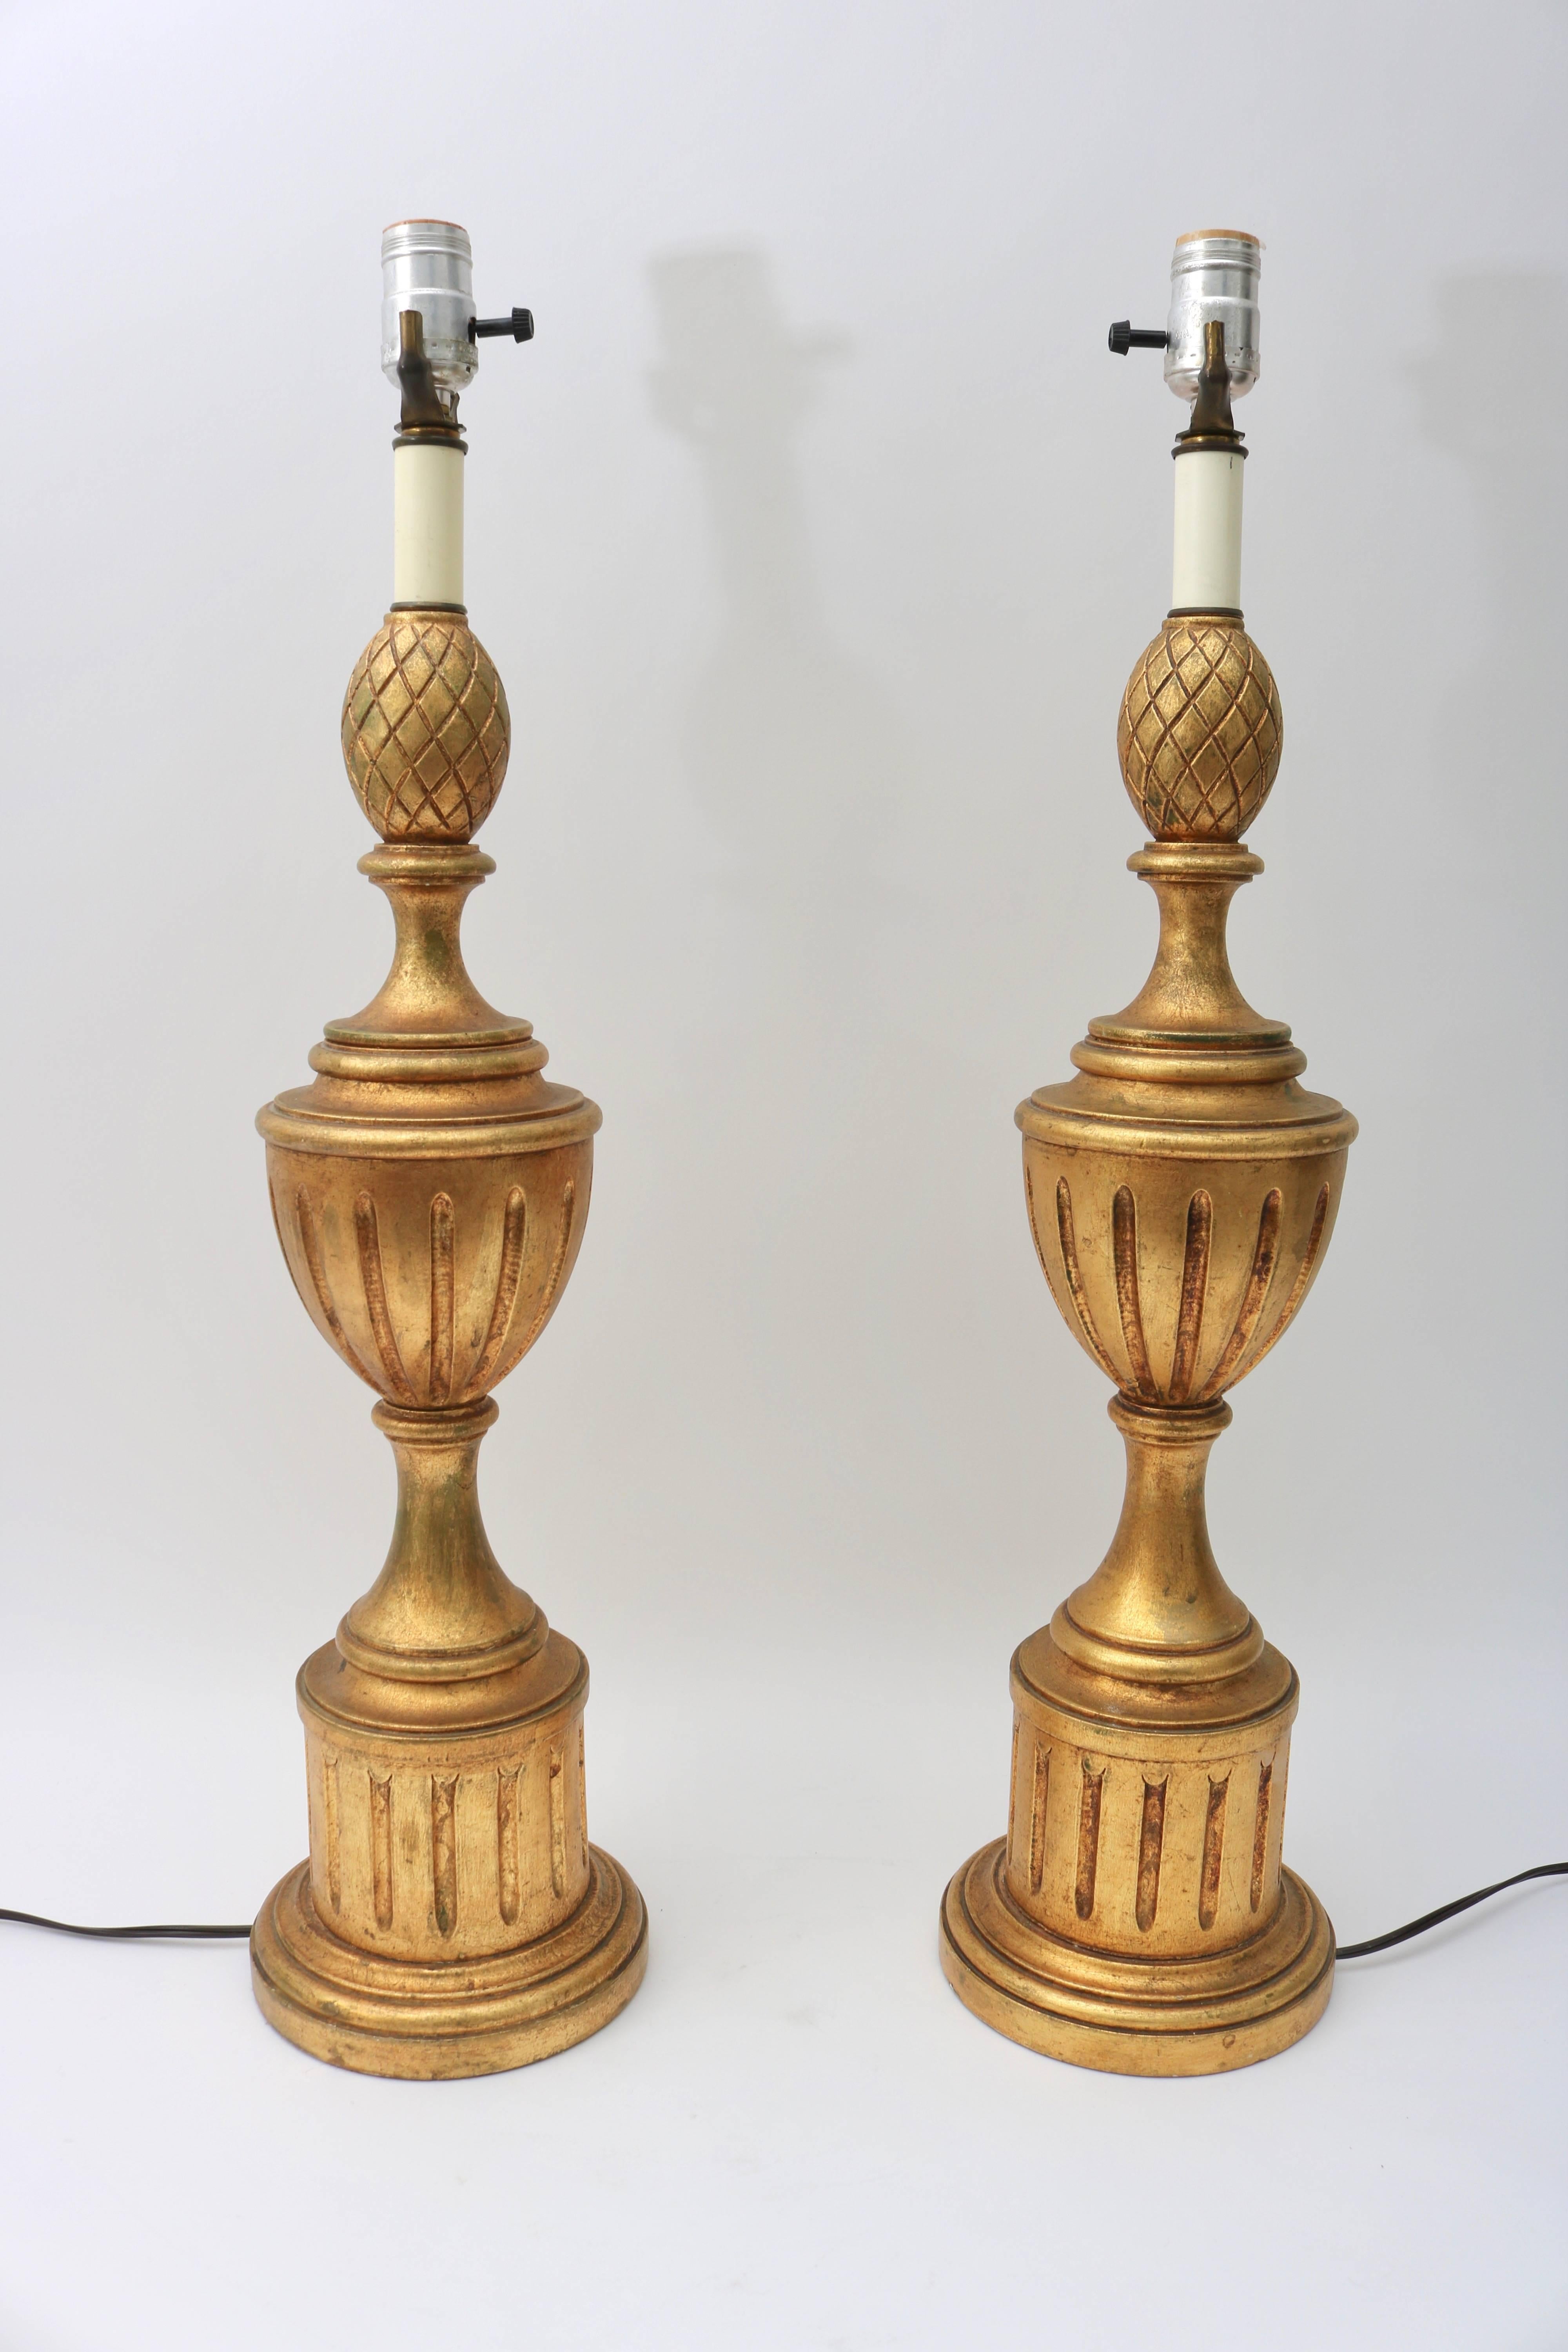 This stylish pair of Louis XV style influenced table lamps with their fluted-urn-form and gold finish will make the perfect addition to your home.

For best net trade price or additional questions regarding this item, please click the